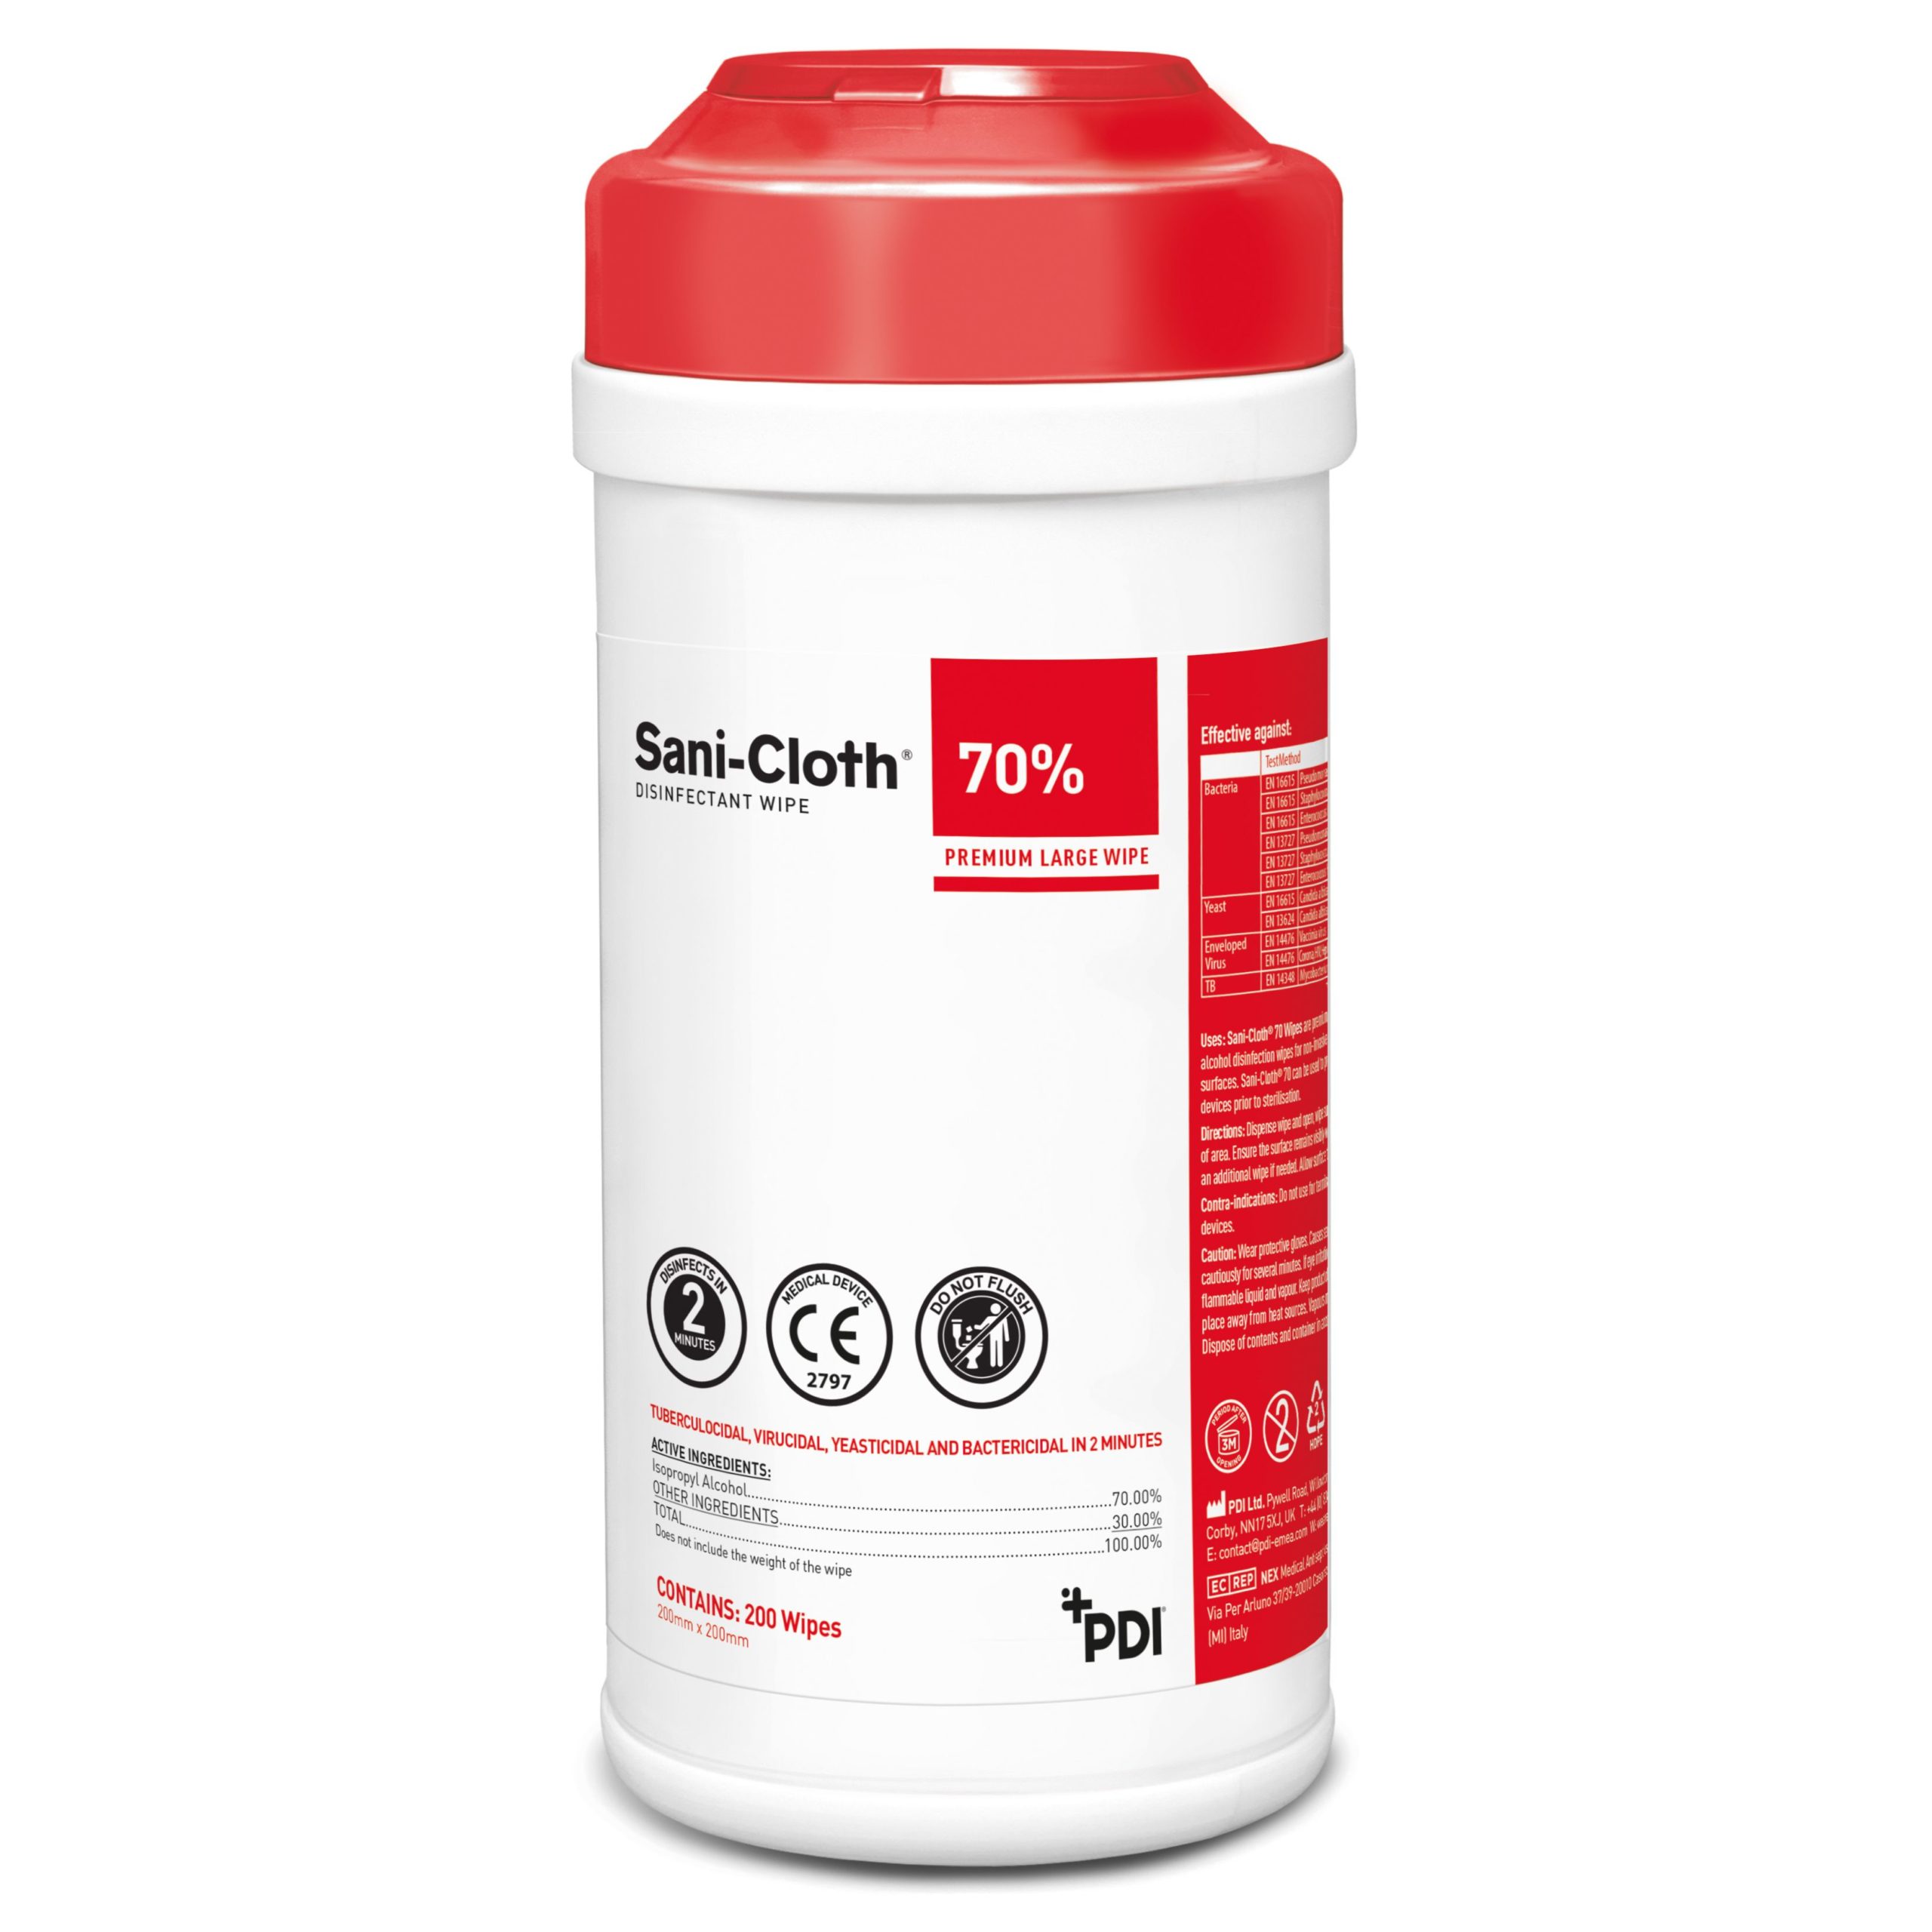 Easy Screen® Cleaning Wipe - PDI Healthcare